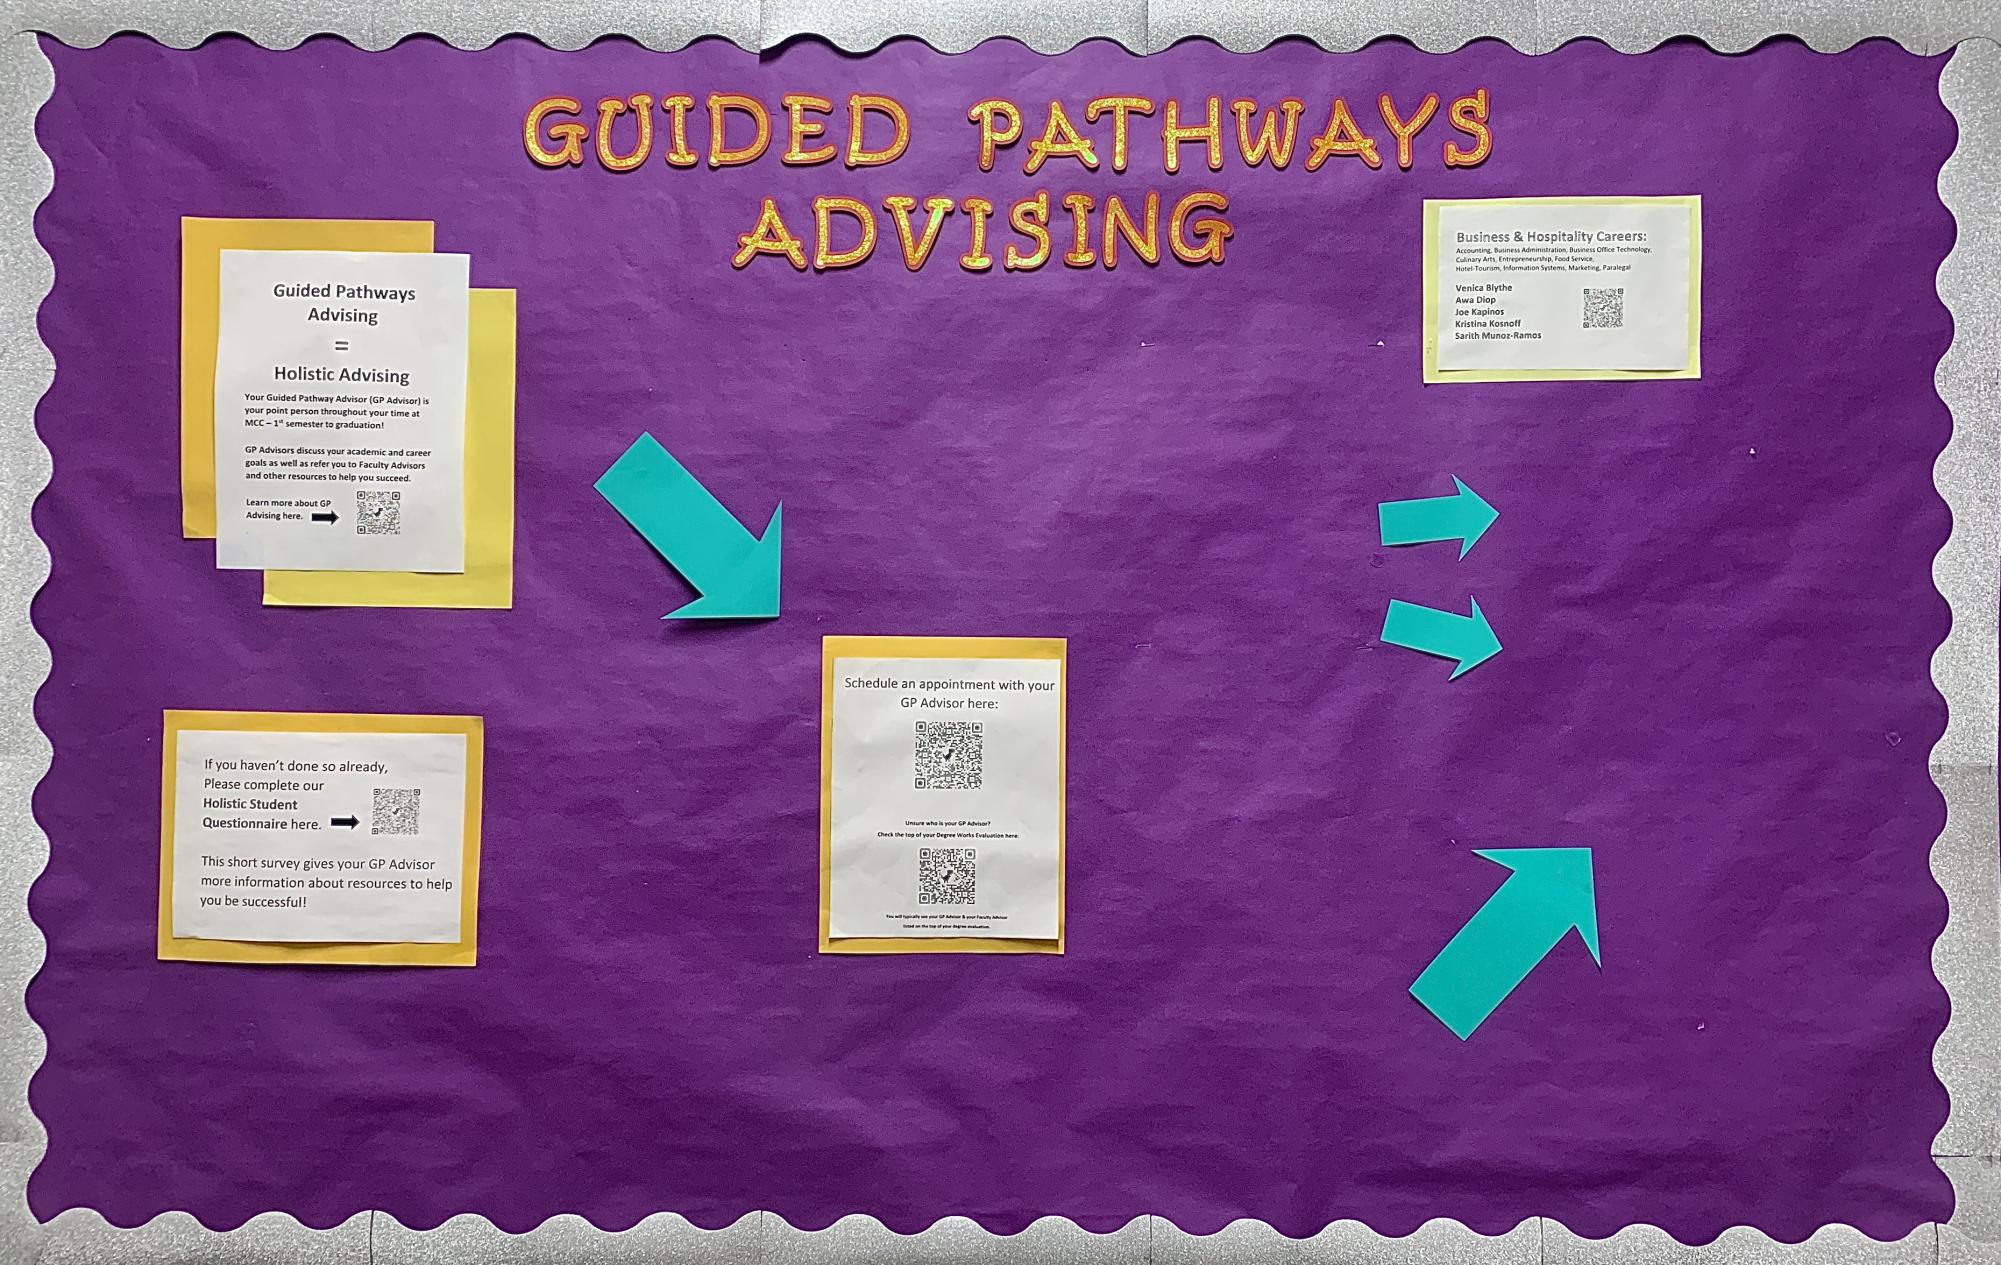 Bulletin board outside of Guided Pathways Advising Office.